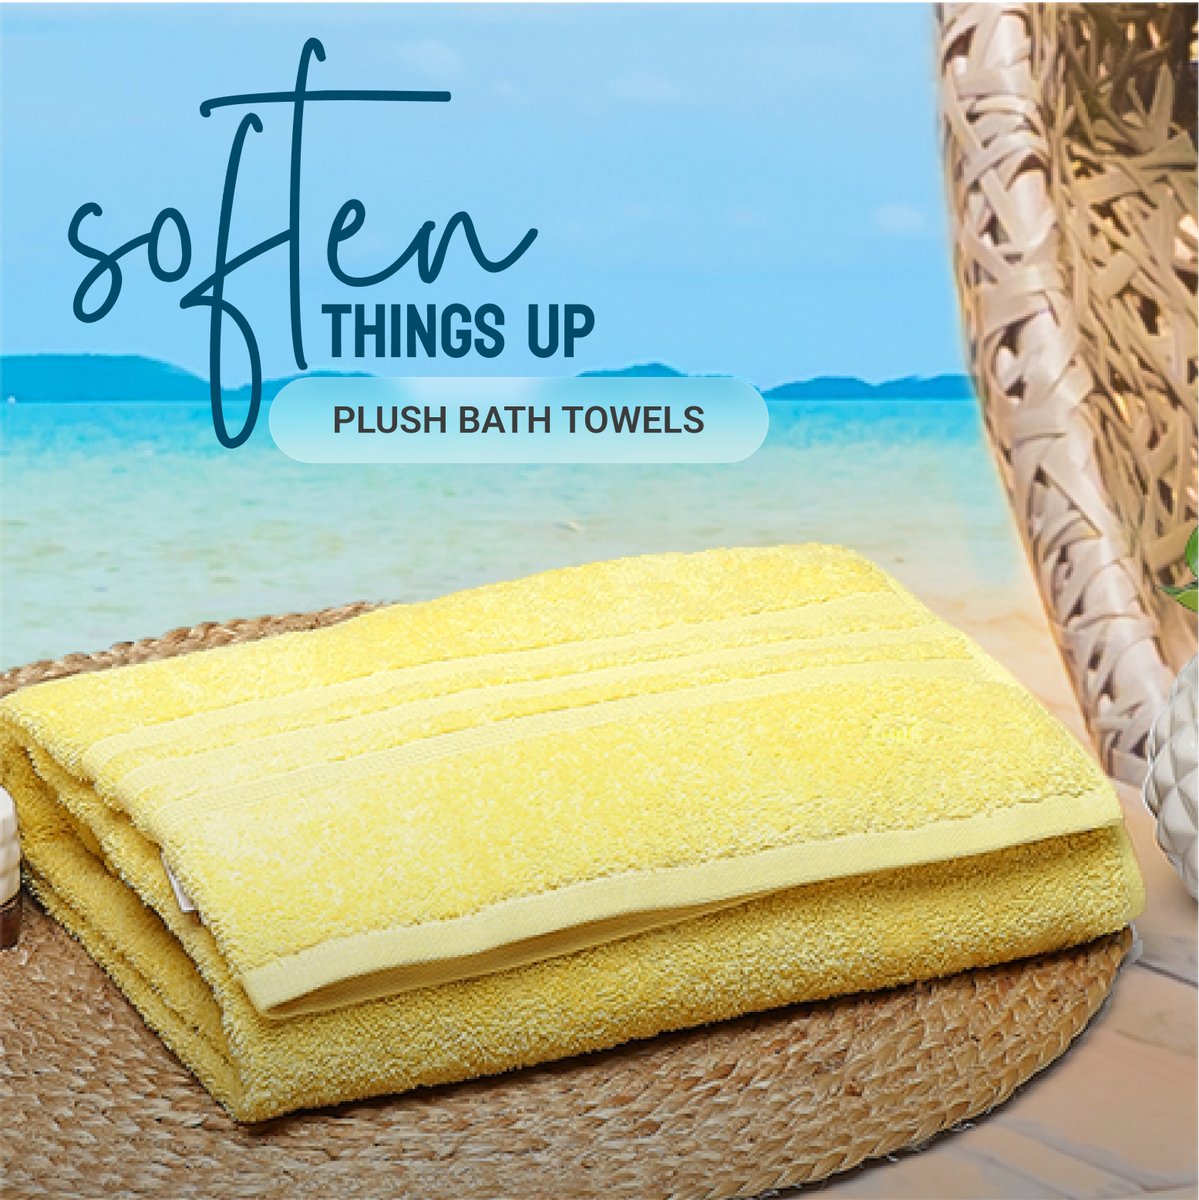 Feel pampered and refreshed with our super soft bath towels.
#monecarlostyle #towels #towelseries #towelset #instahome #bathroom #homedecor